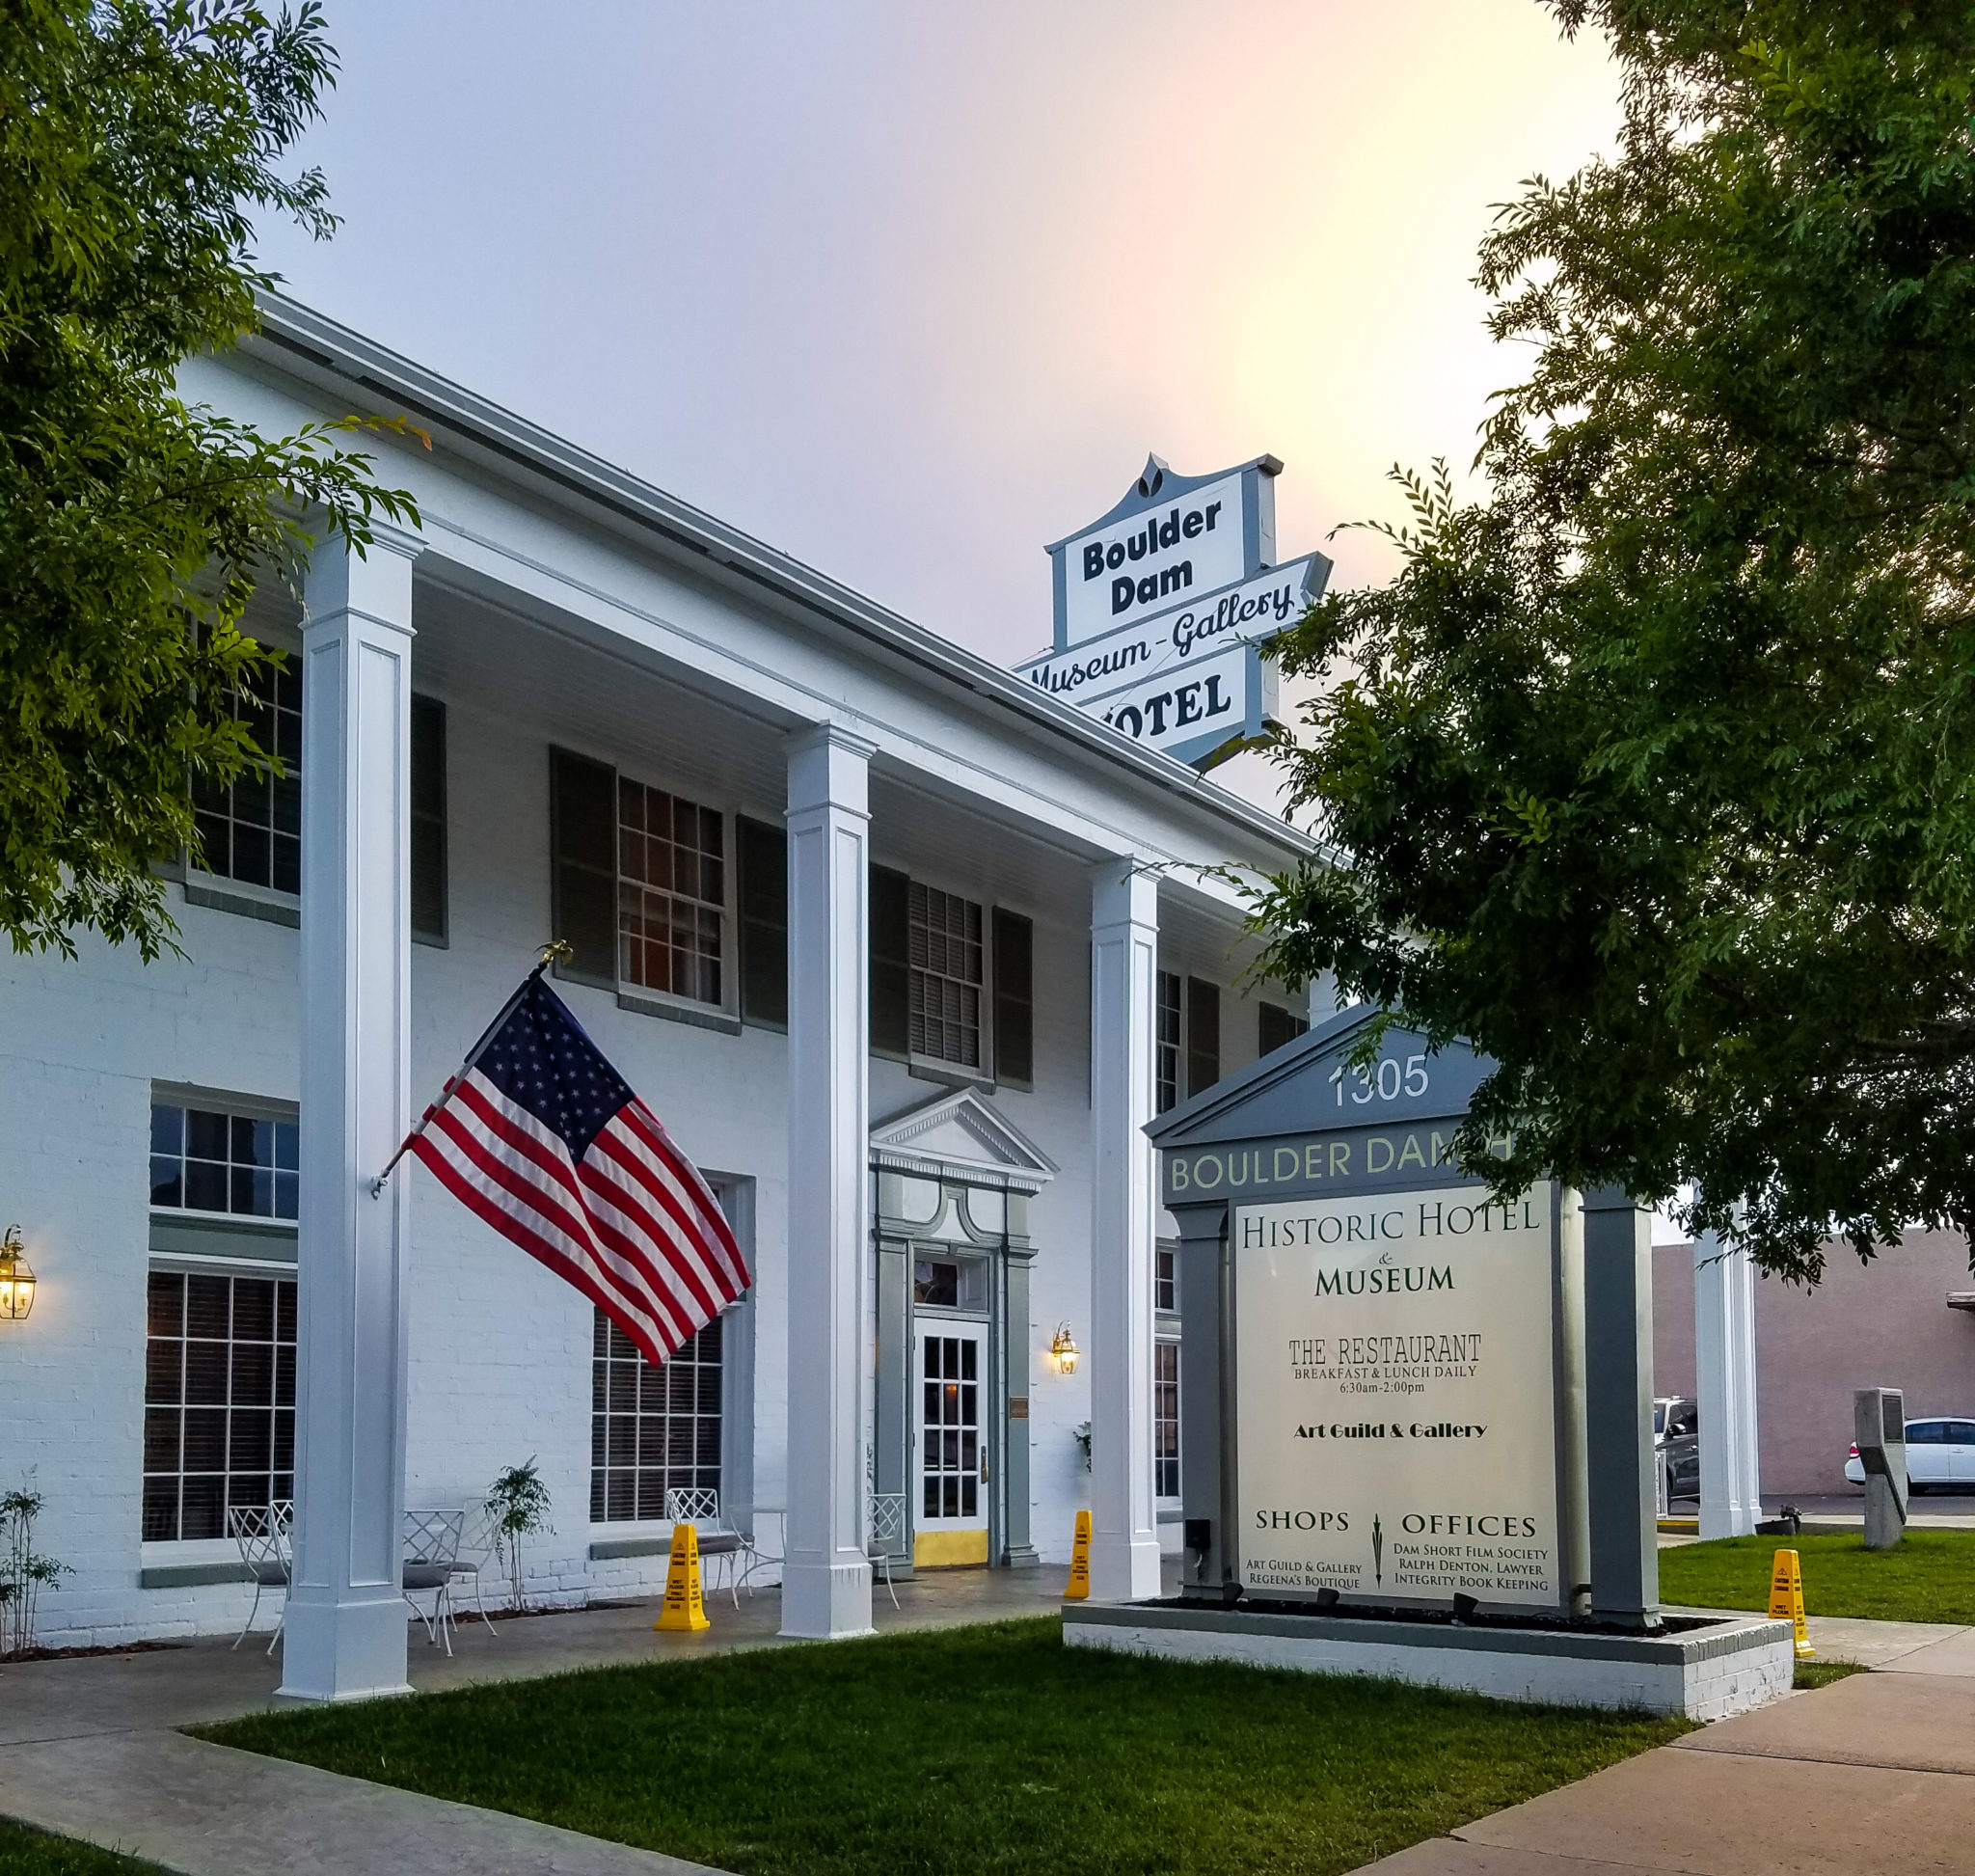 The Boulder Dam Hotel is a great place to stay near the Hoover Dam. It is right in the middle of Boulder City and has a nice history which is showcased in the hotels museum. If you love staying in "off the beaten path" places, you will love the warm and friendly vibe.